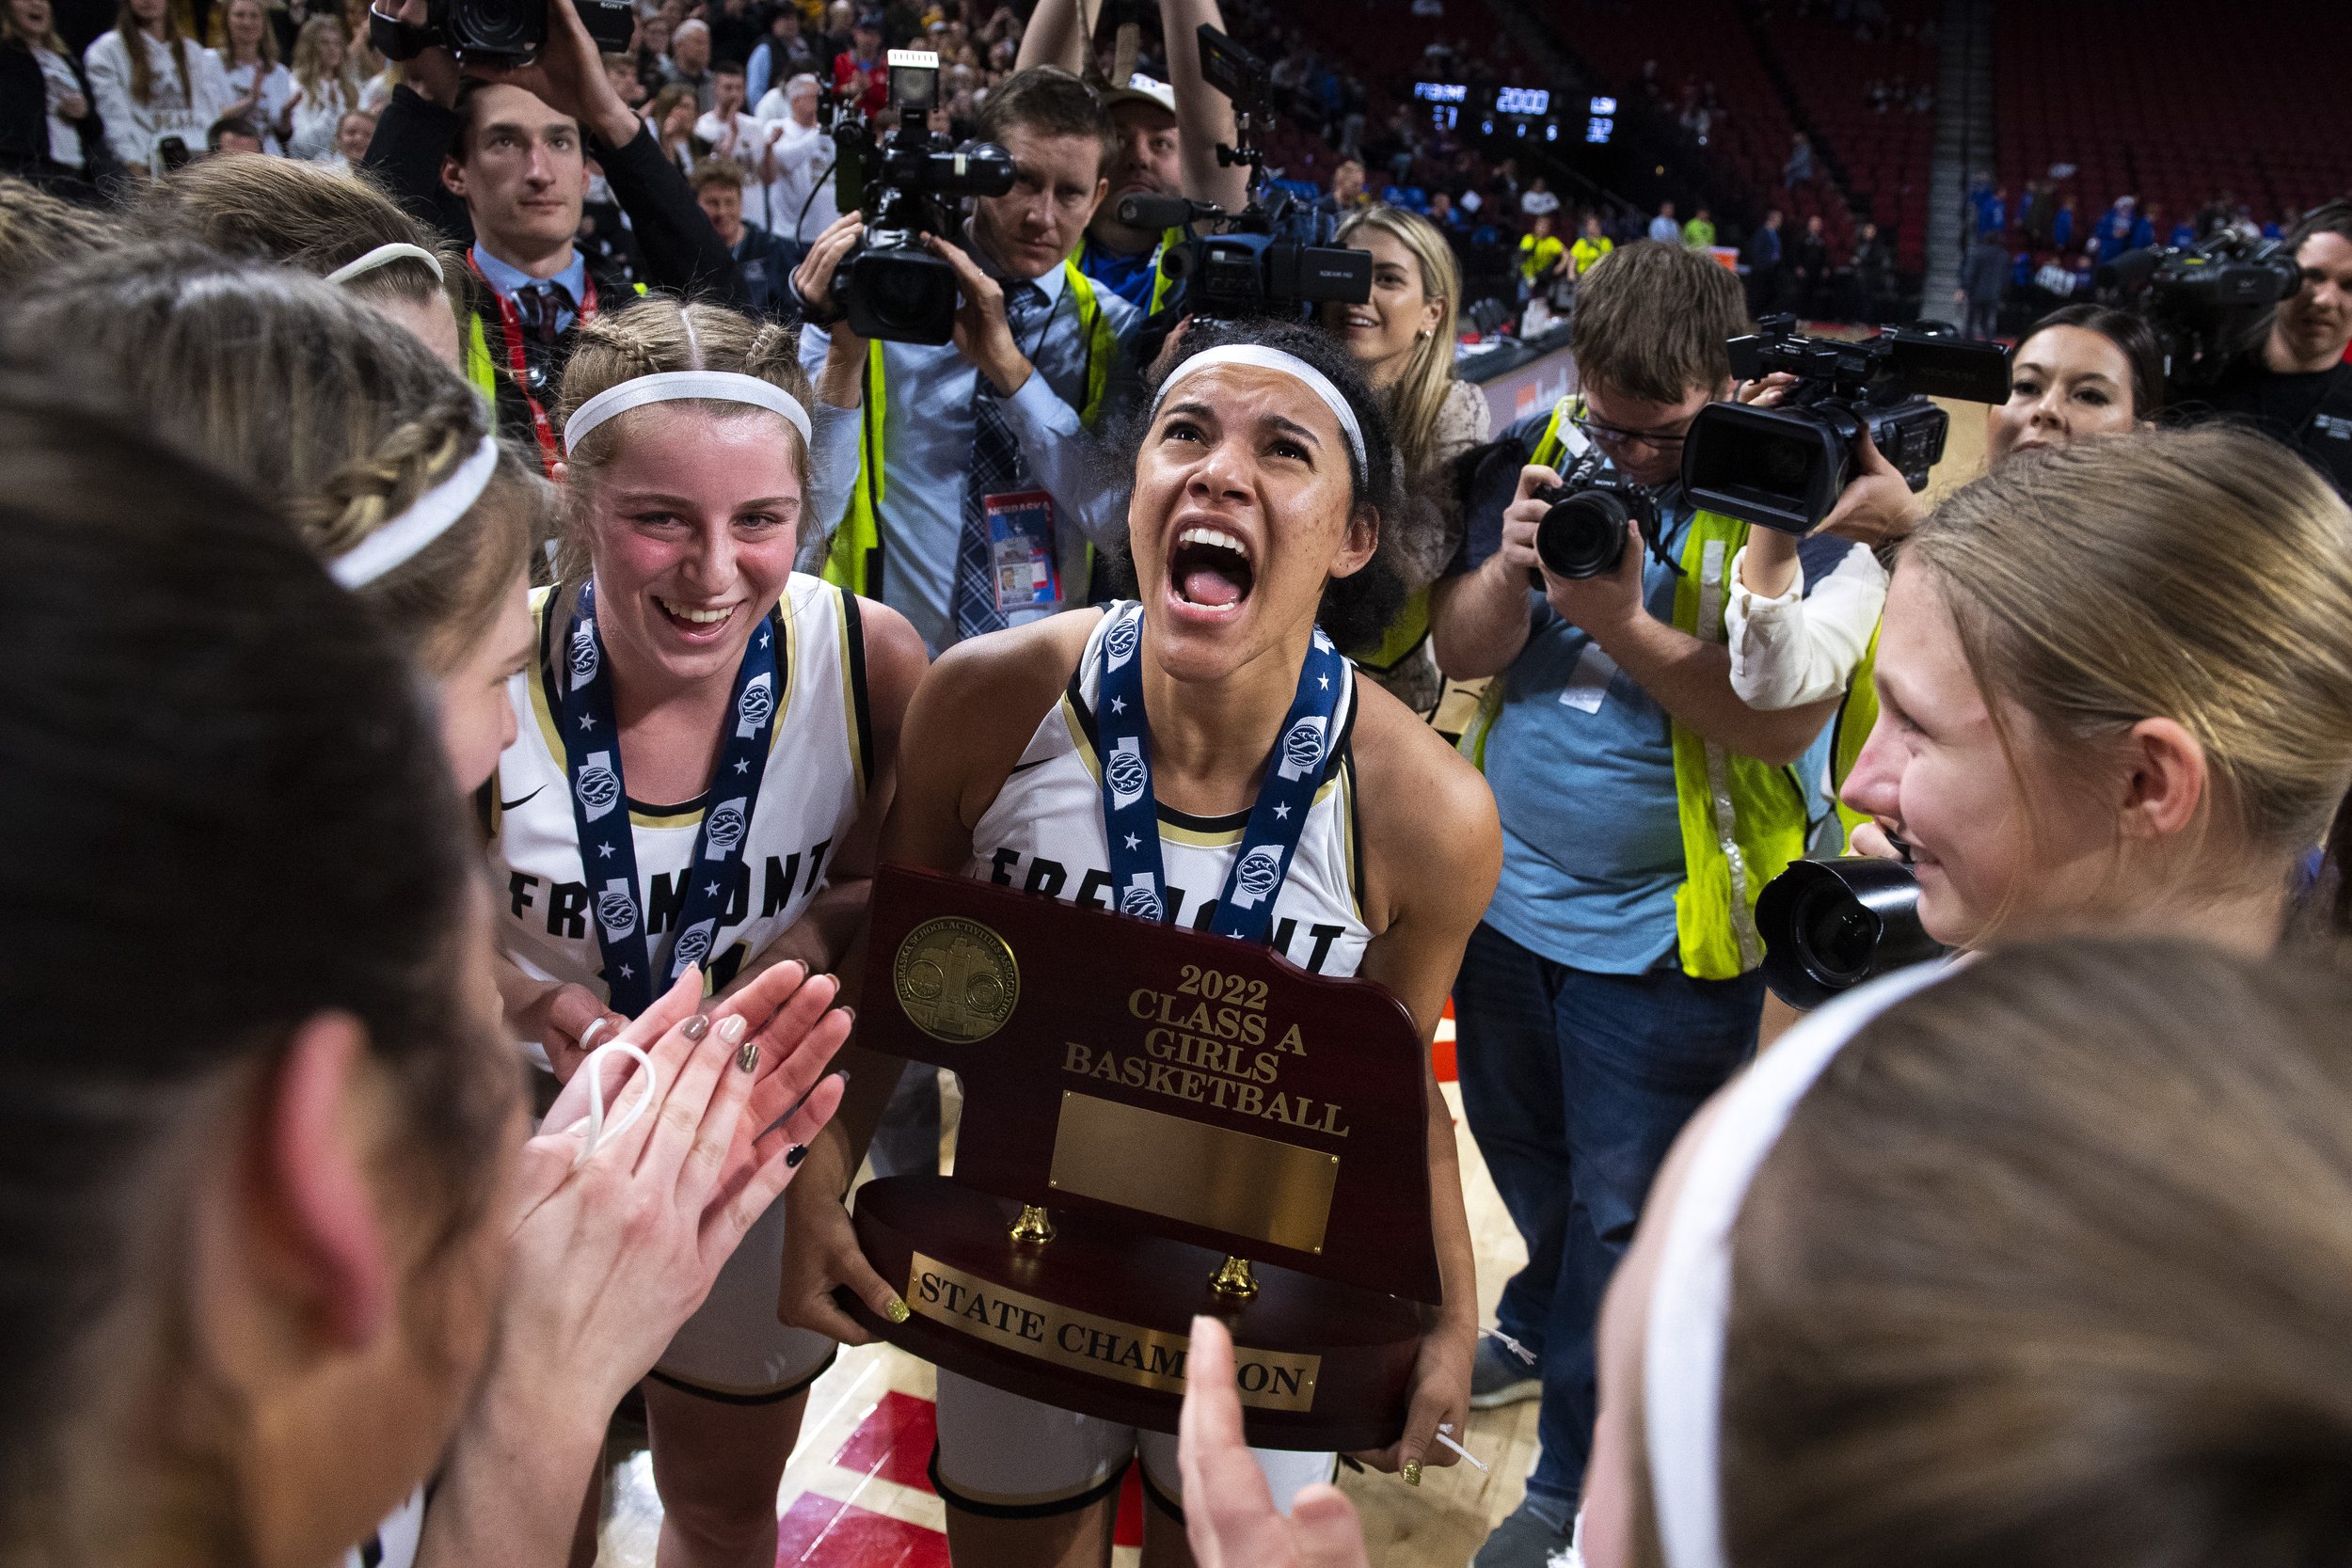  Fremont's Macy Bryant (center) celebrates with her teammate during the Class A girls championship at Pinnacle Bank Arena on March 11, 2022, in Lincoln, Nebraska As her teammates gather around her, Macy Bryant only has one thing on her mind. "This is